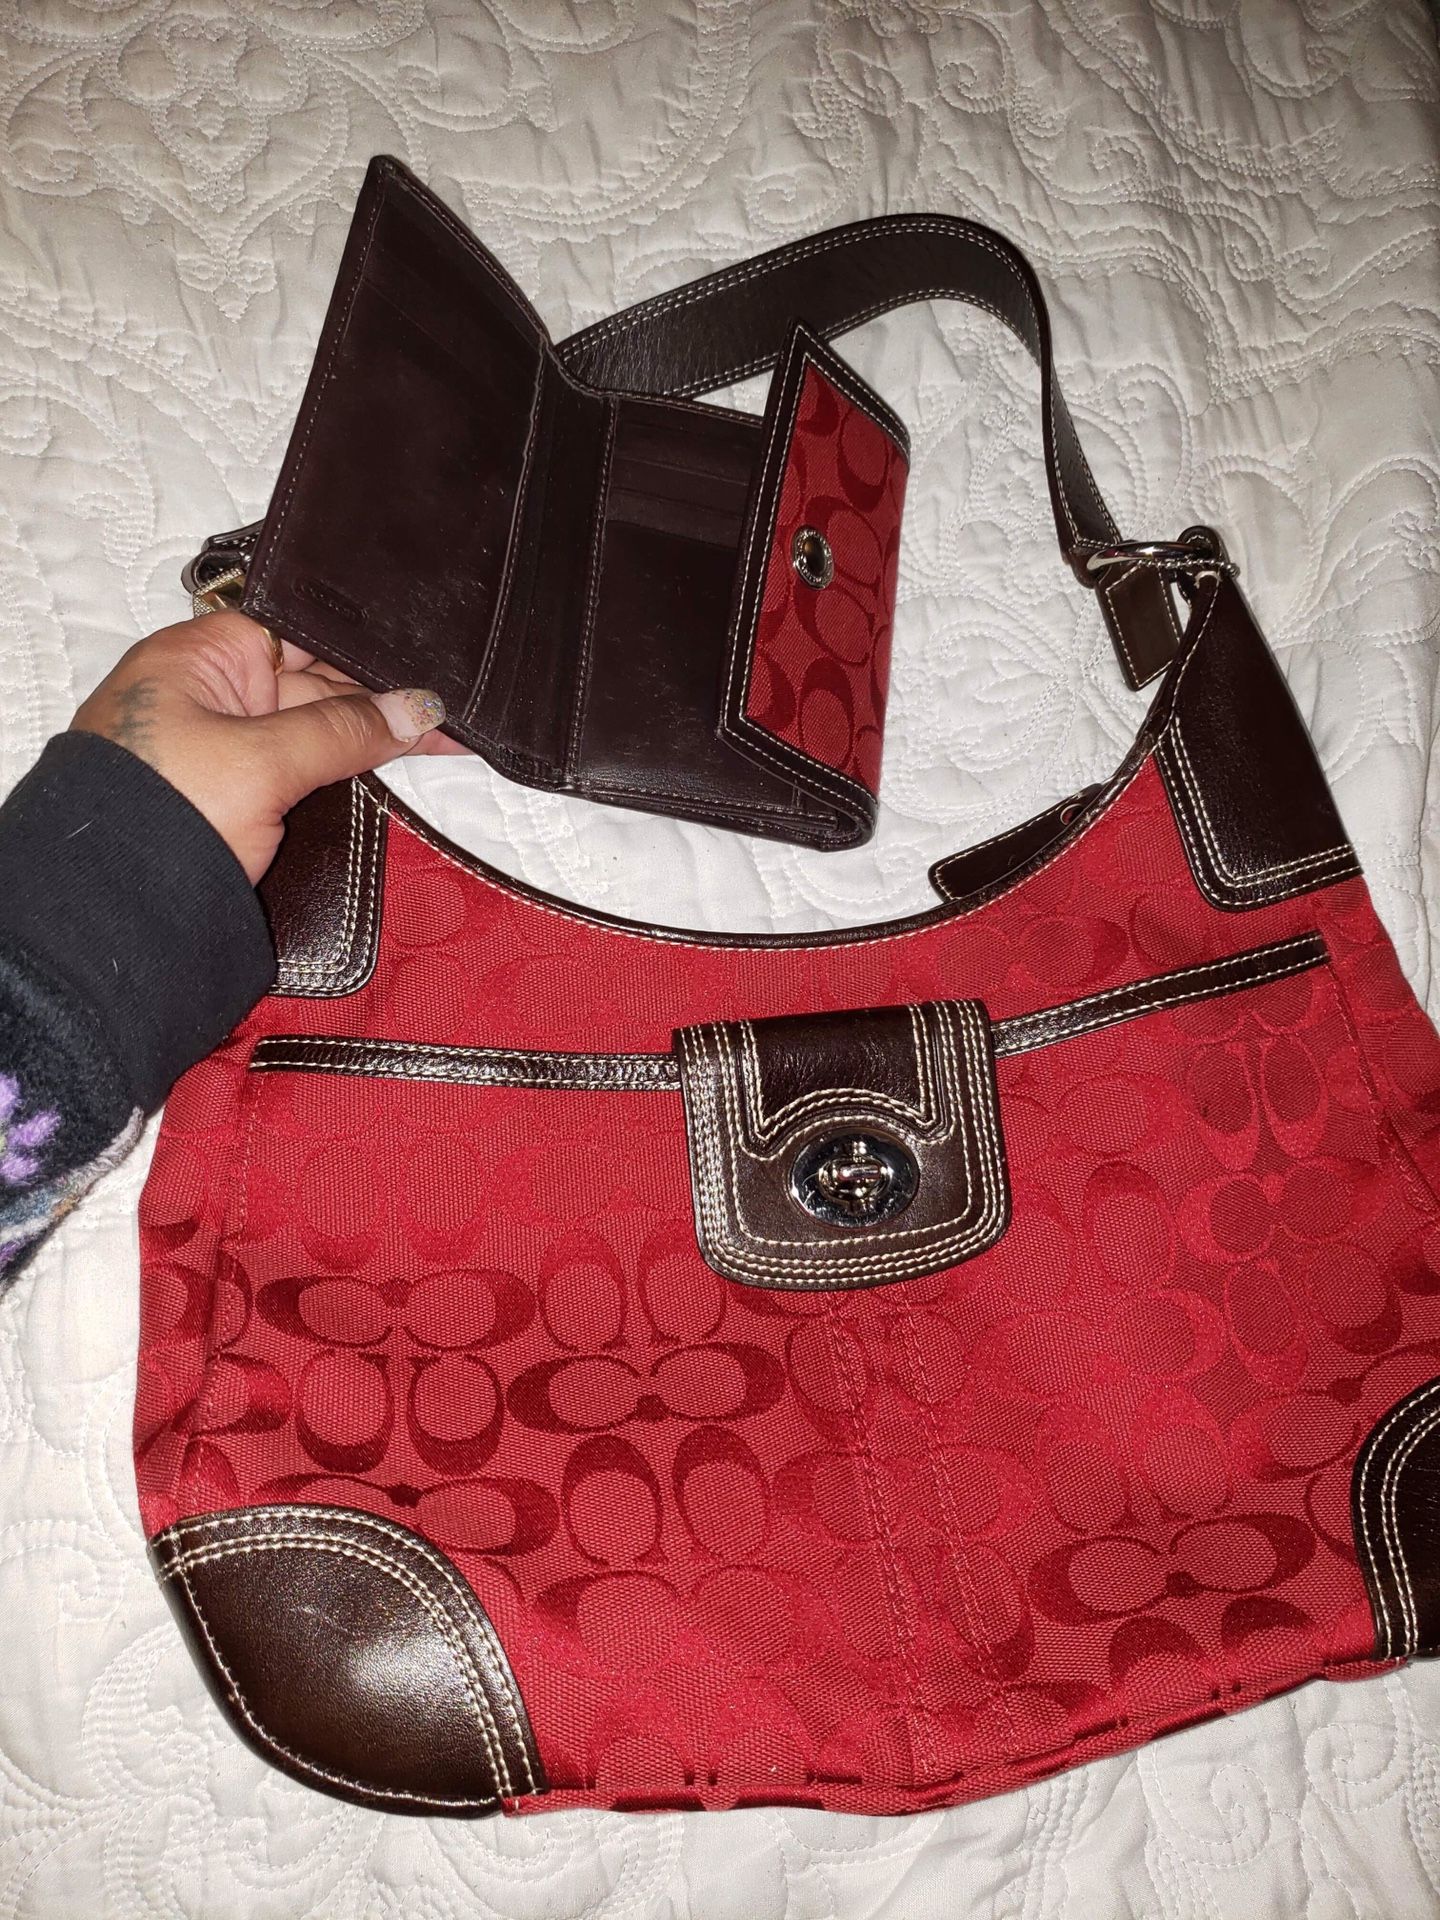 Coach purse with wallet